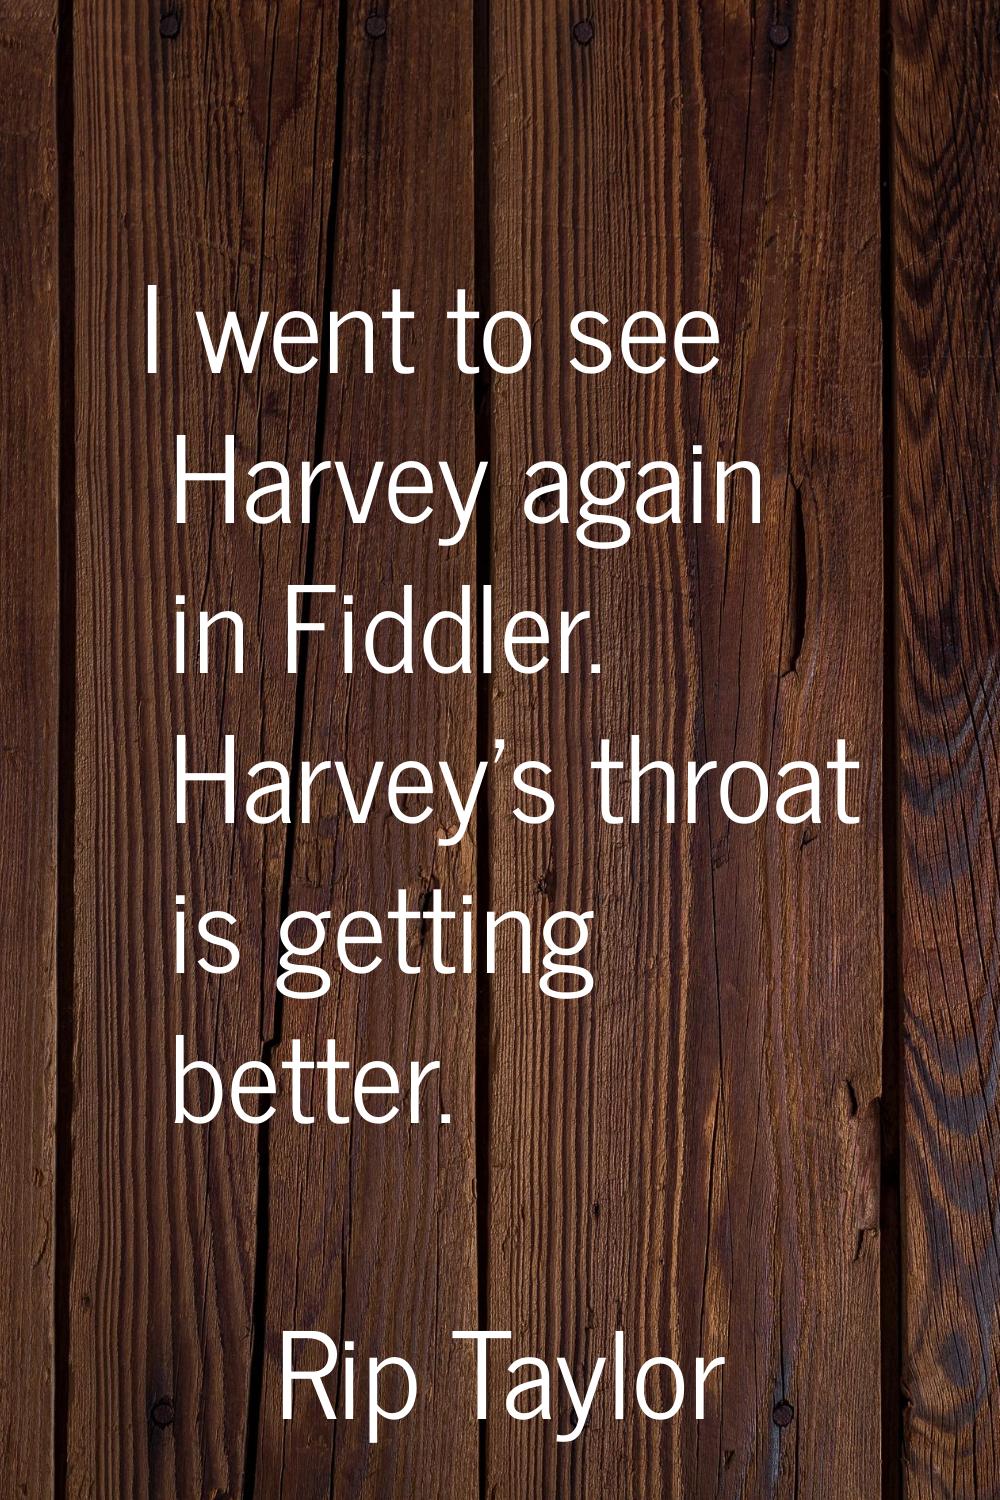 I went to see Harvey again in Fiddler. Harvey's throat is getting better.